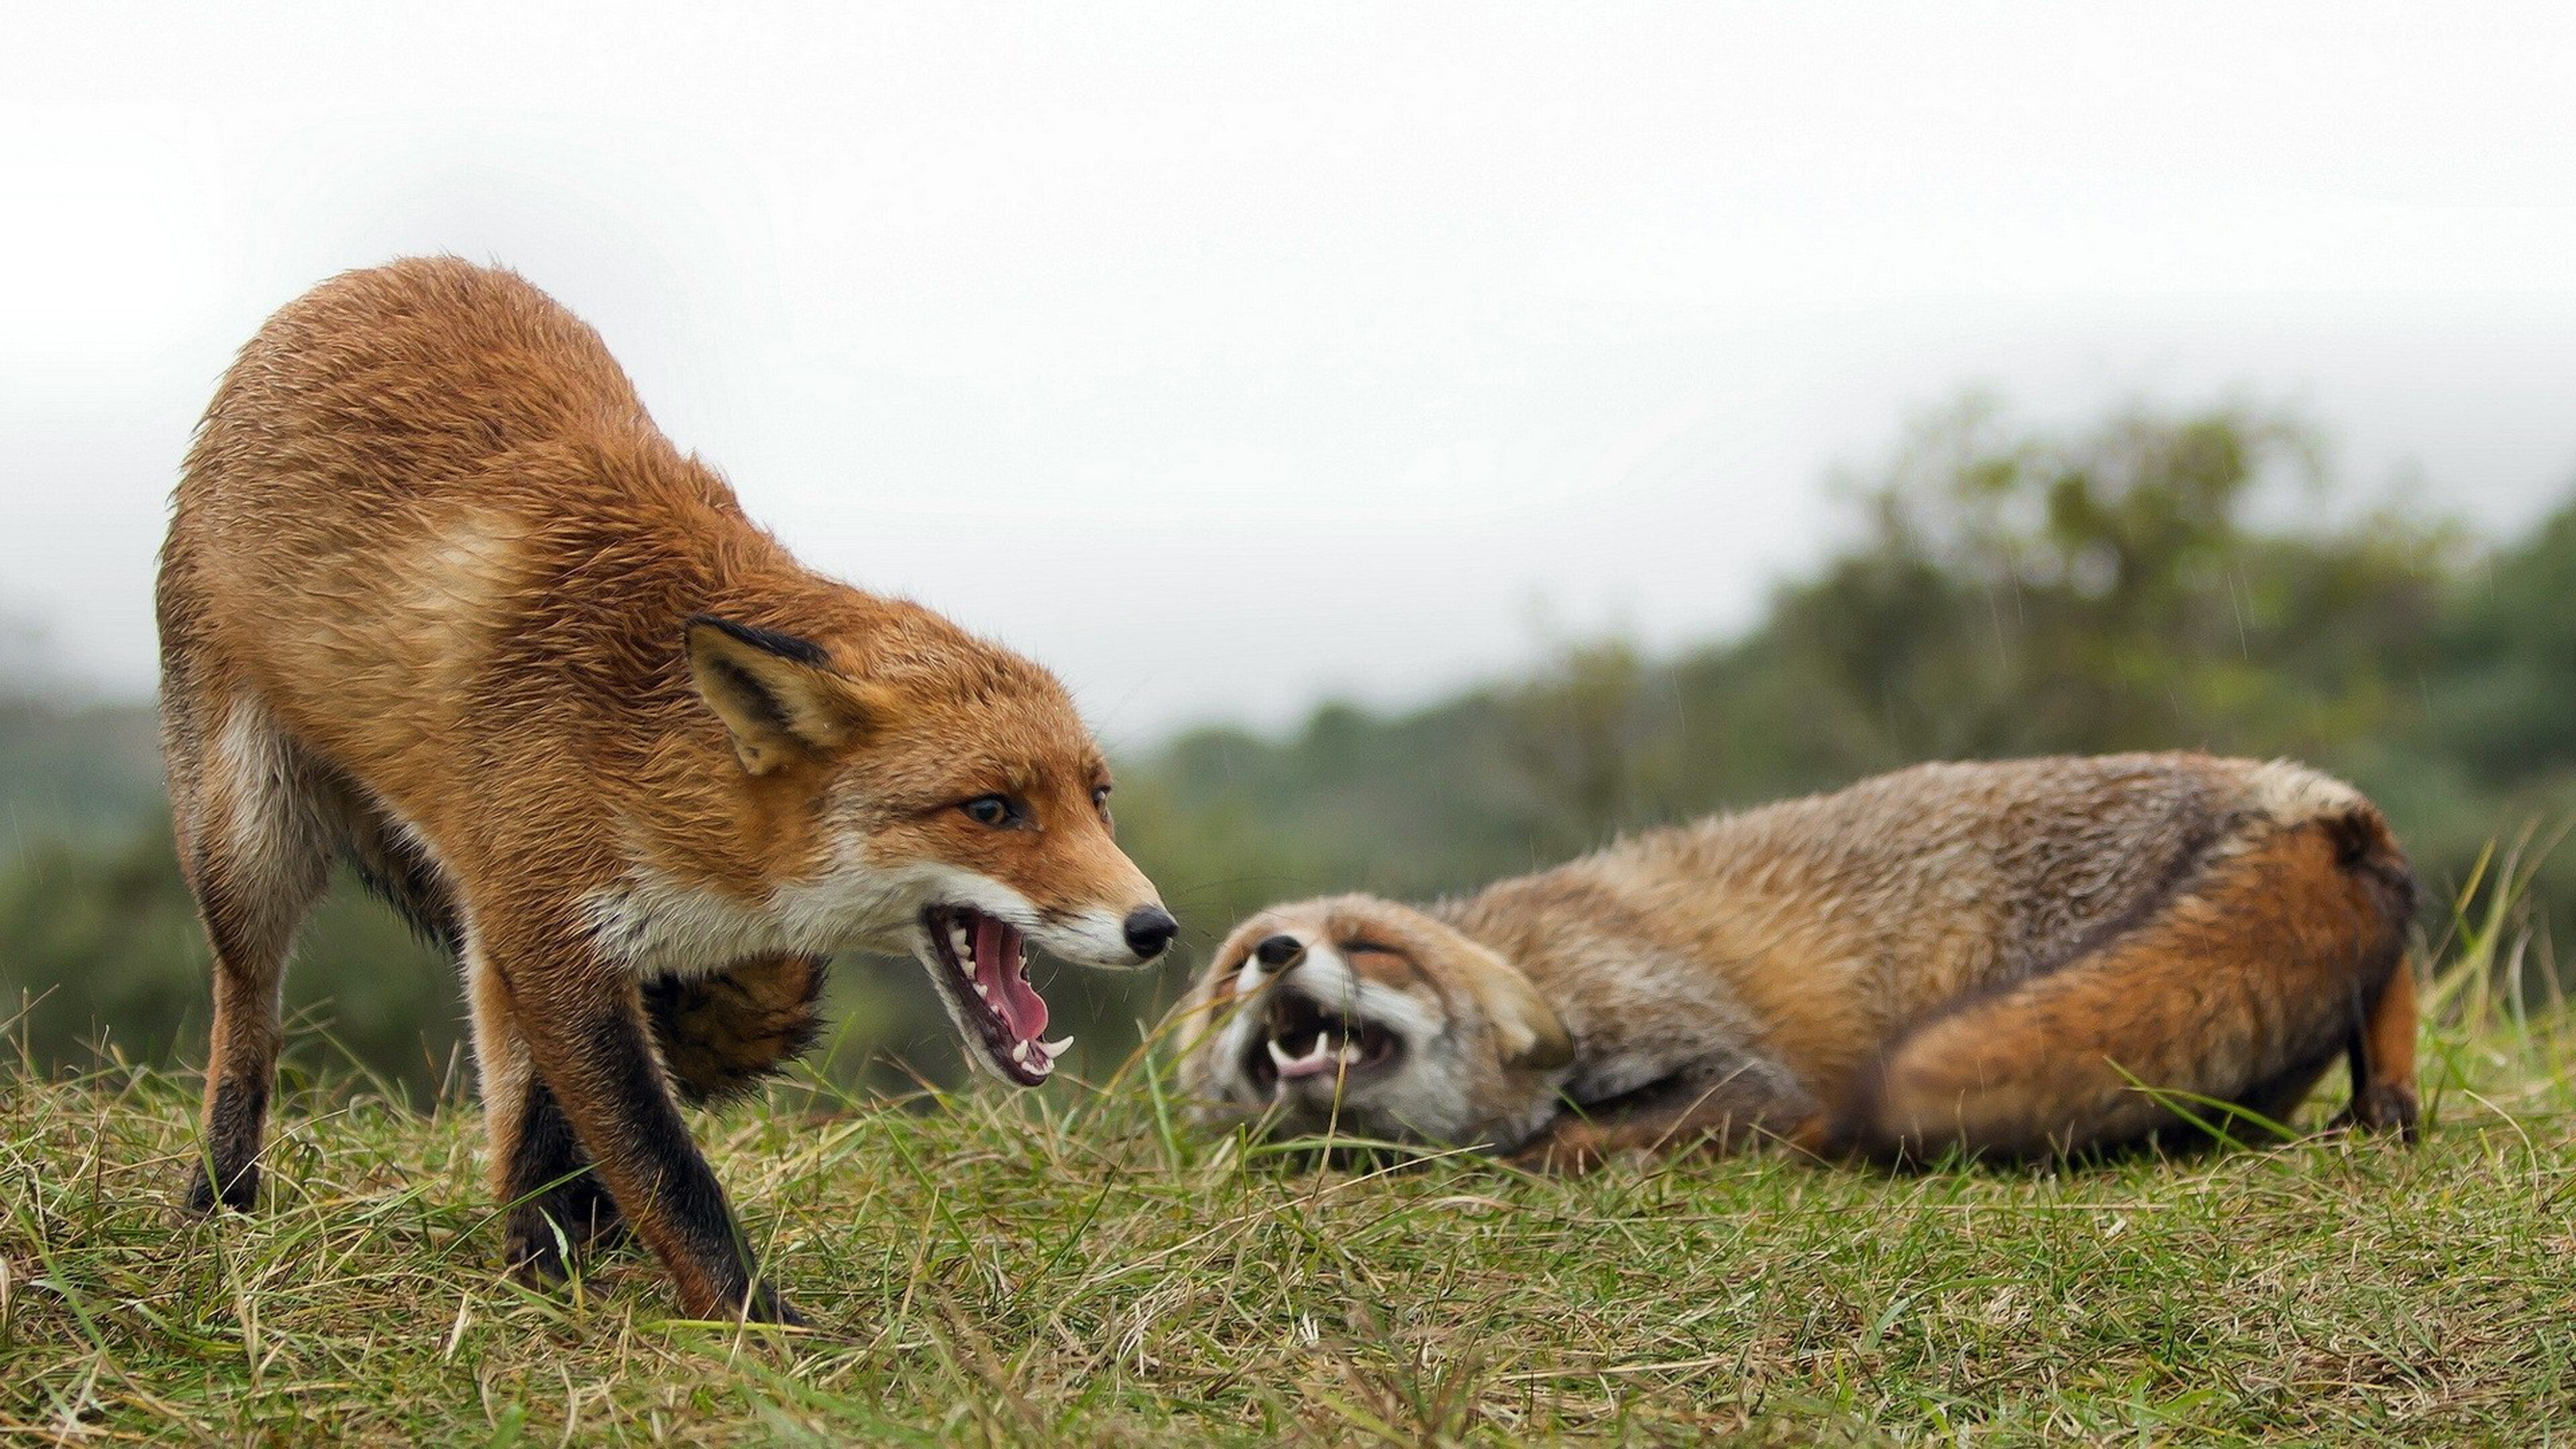 Fox: Members of the dog family, Canidae, Resembling small to medium-sized bushy-tailed dogs. 3840x2160 4K Wallpaper.